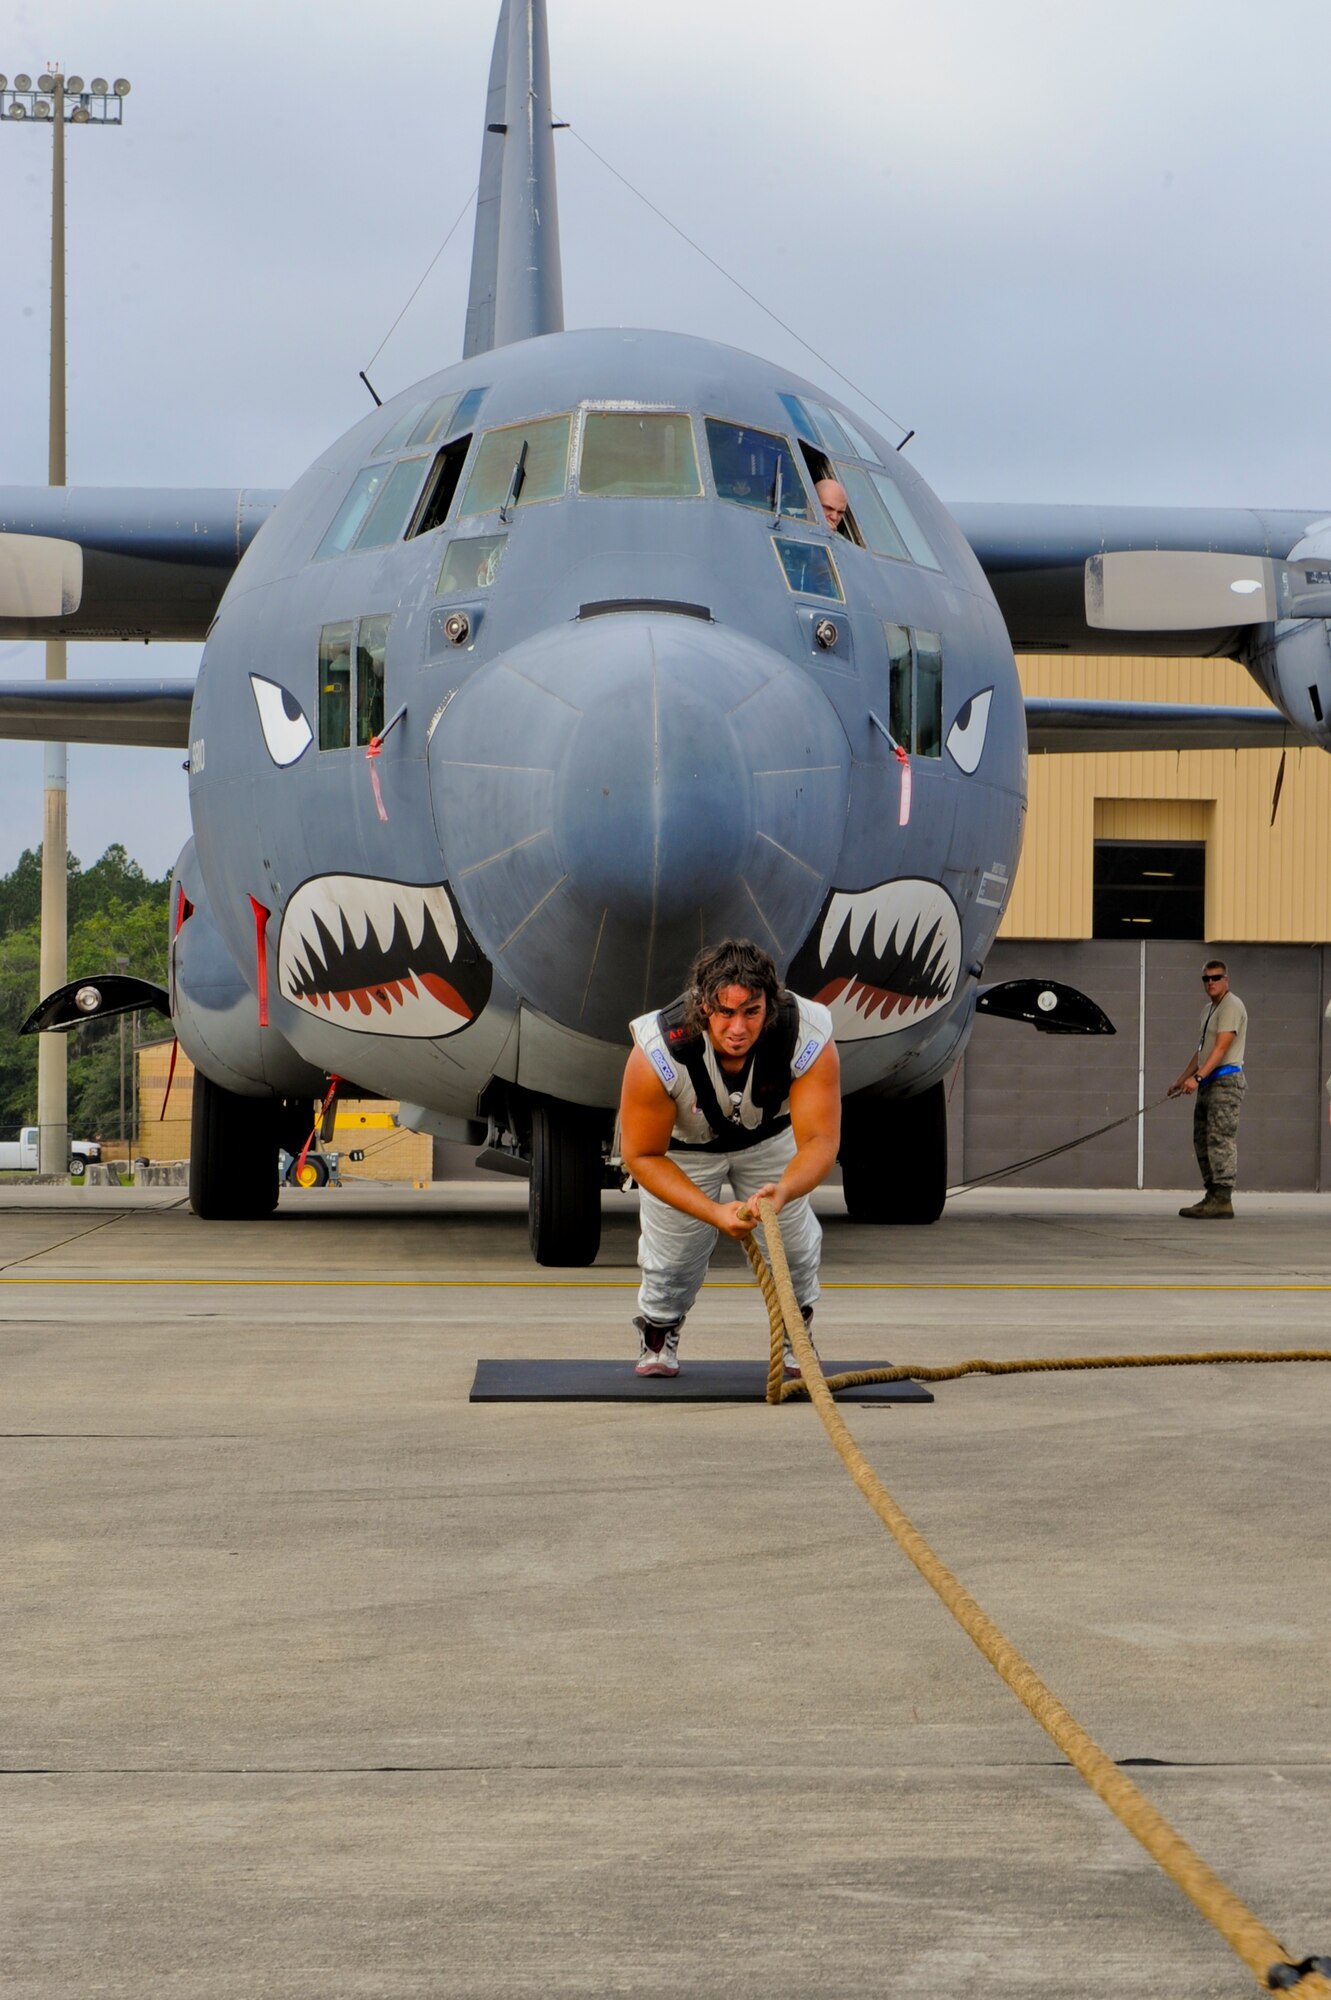 Mark Kirsch, strong man for "Man vs. Jumbo Jets", pulls an HC-130 Combat King during practice pulls at Moody Air Force Base, Ga., Oct. 5, 2012. The practice allows him to get a feel for the aircraft and a survey of the surface he will be using during the upcoming open house. (U.S. Air Force photo by Staff Sgt. Joshua J. Garcia/Released)